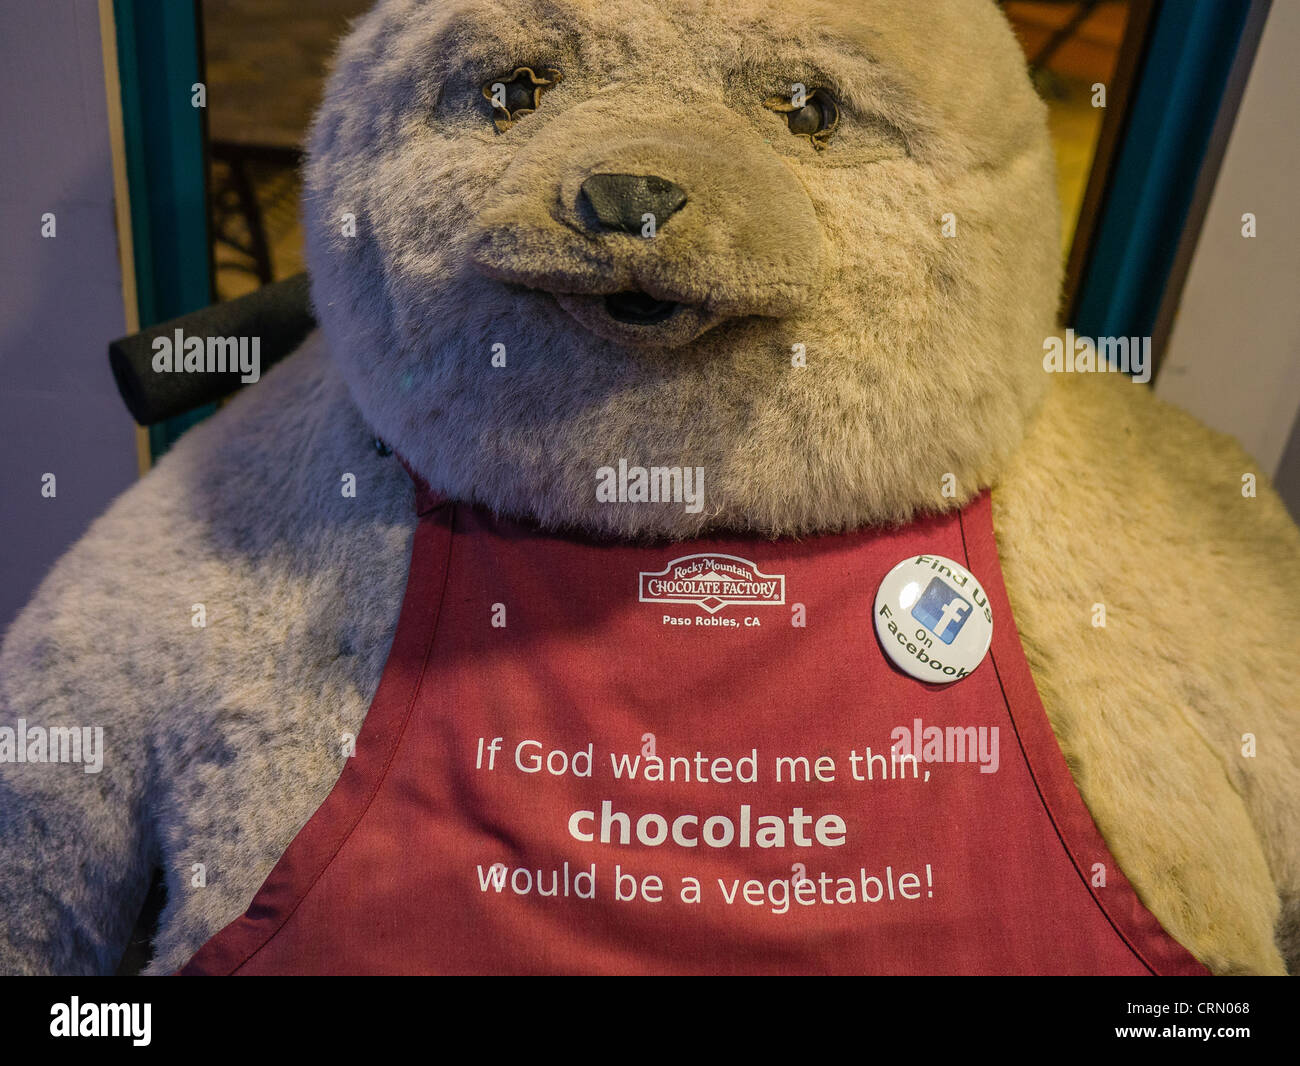 A large children's stuffed bear wears an apron with a very funny sentence on it outside a chocolate store, Paso Robles, CA. Stock Photo